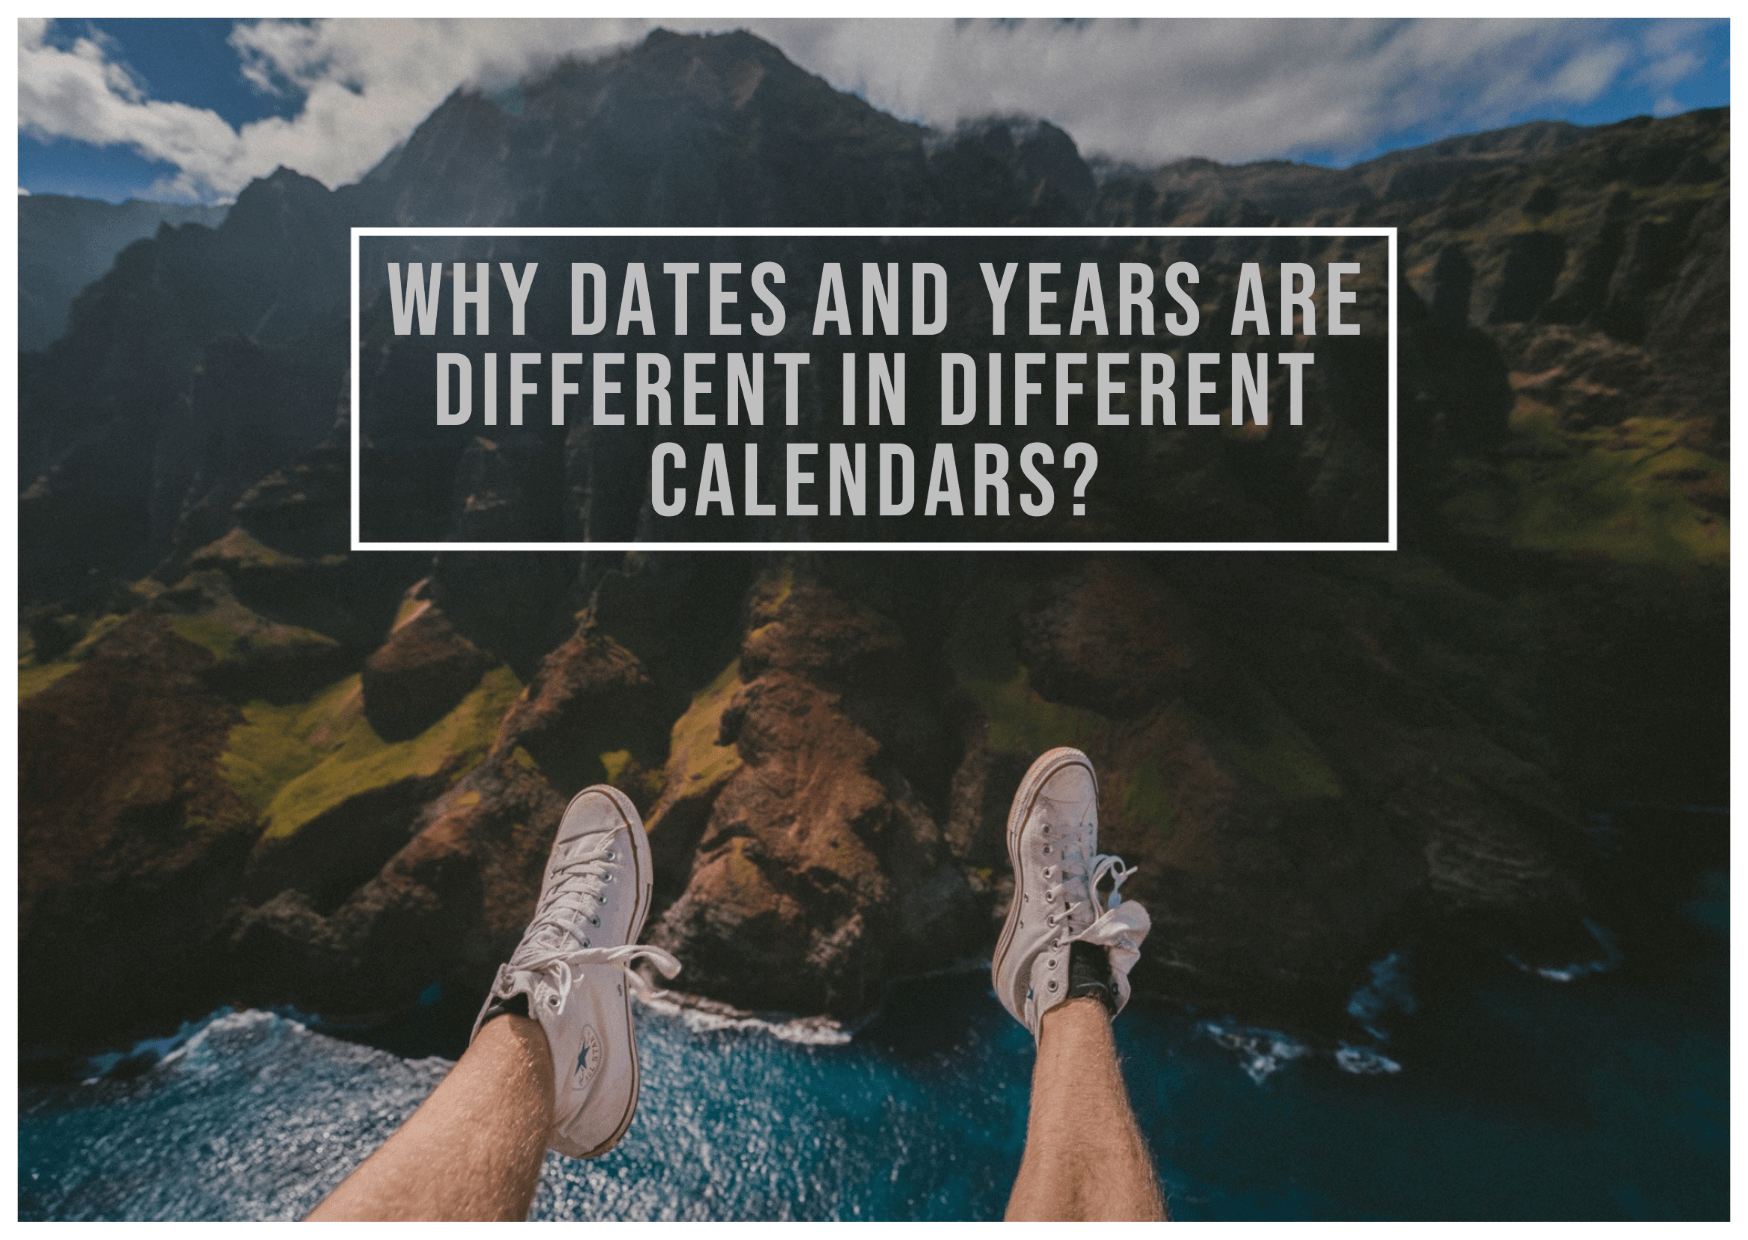 Why dates and years are different in different calendars?